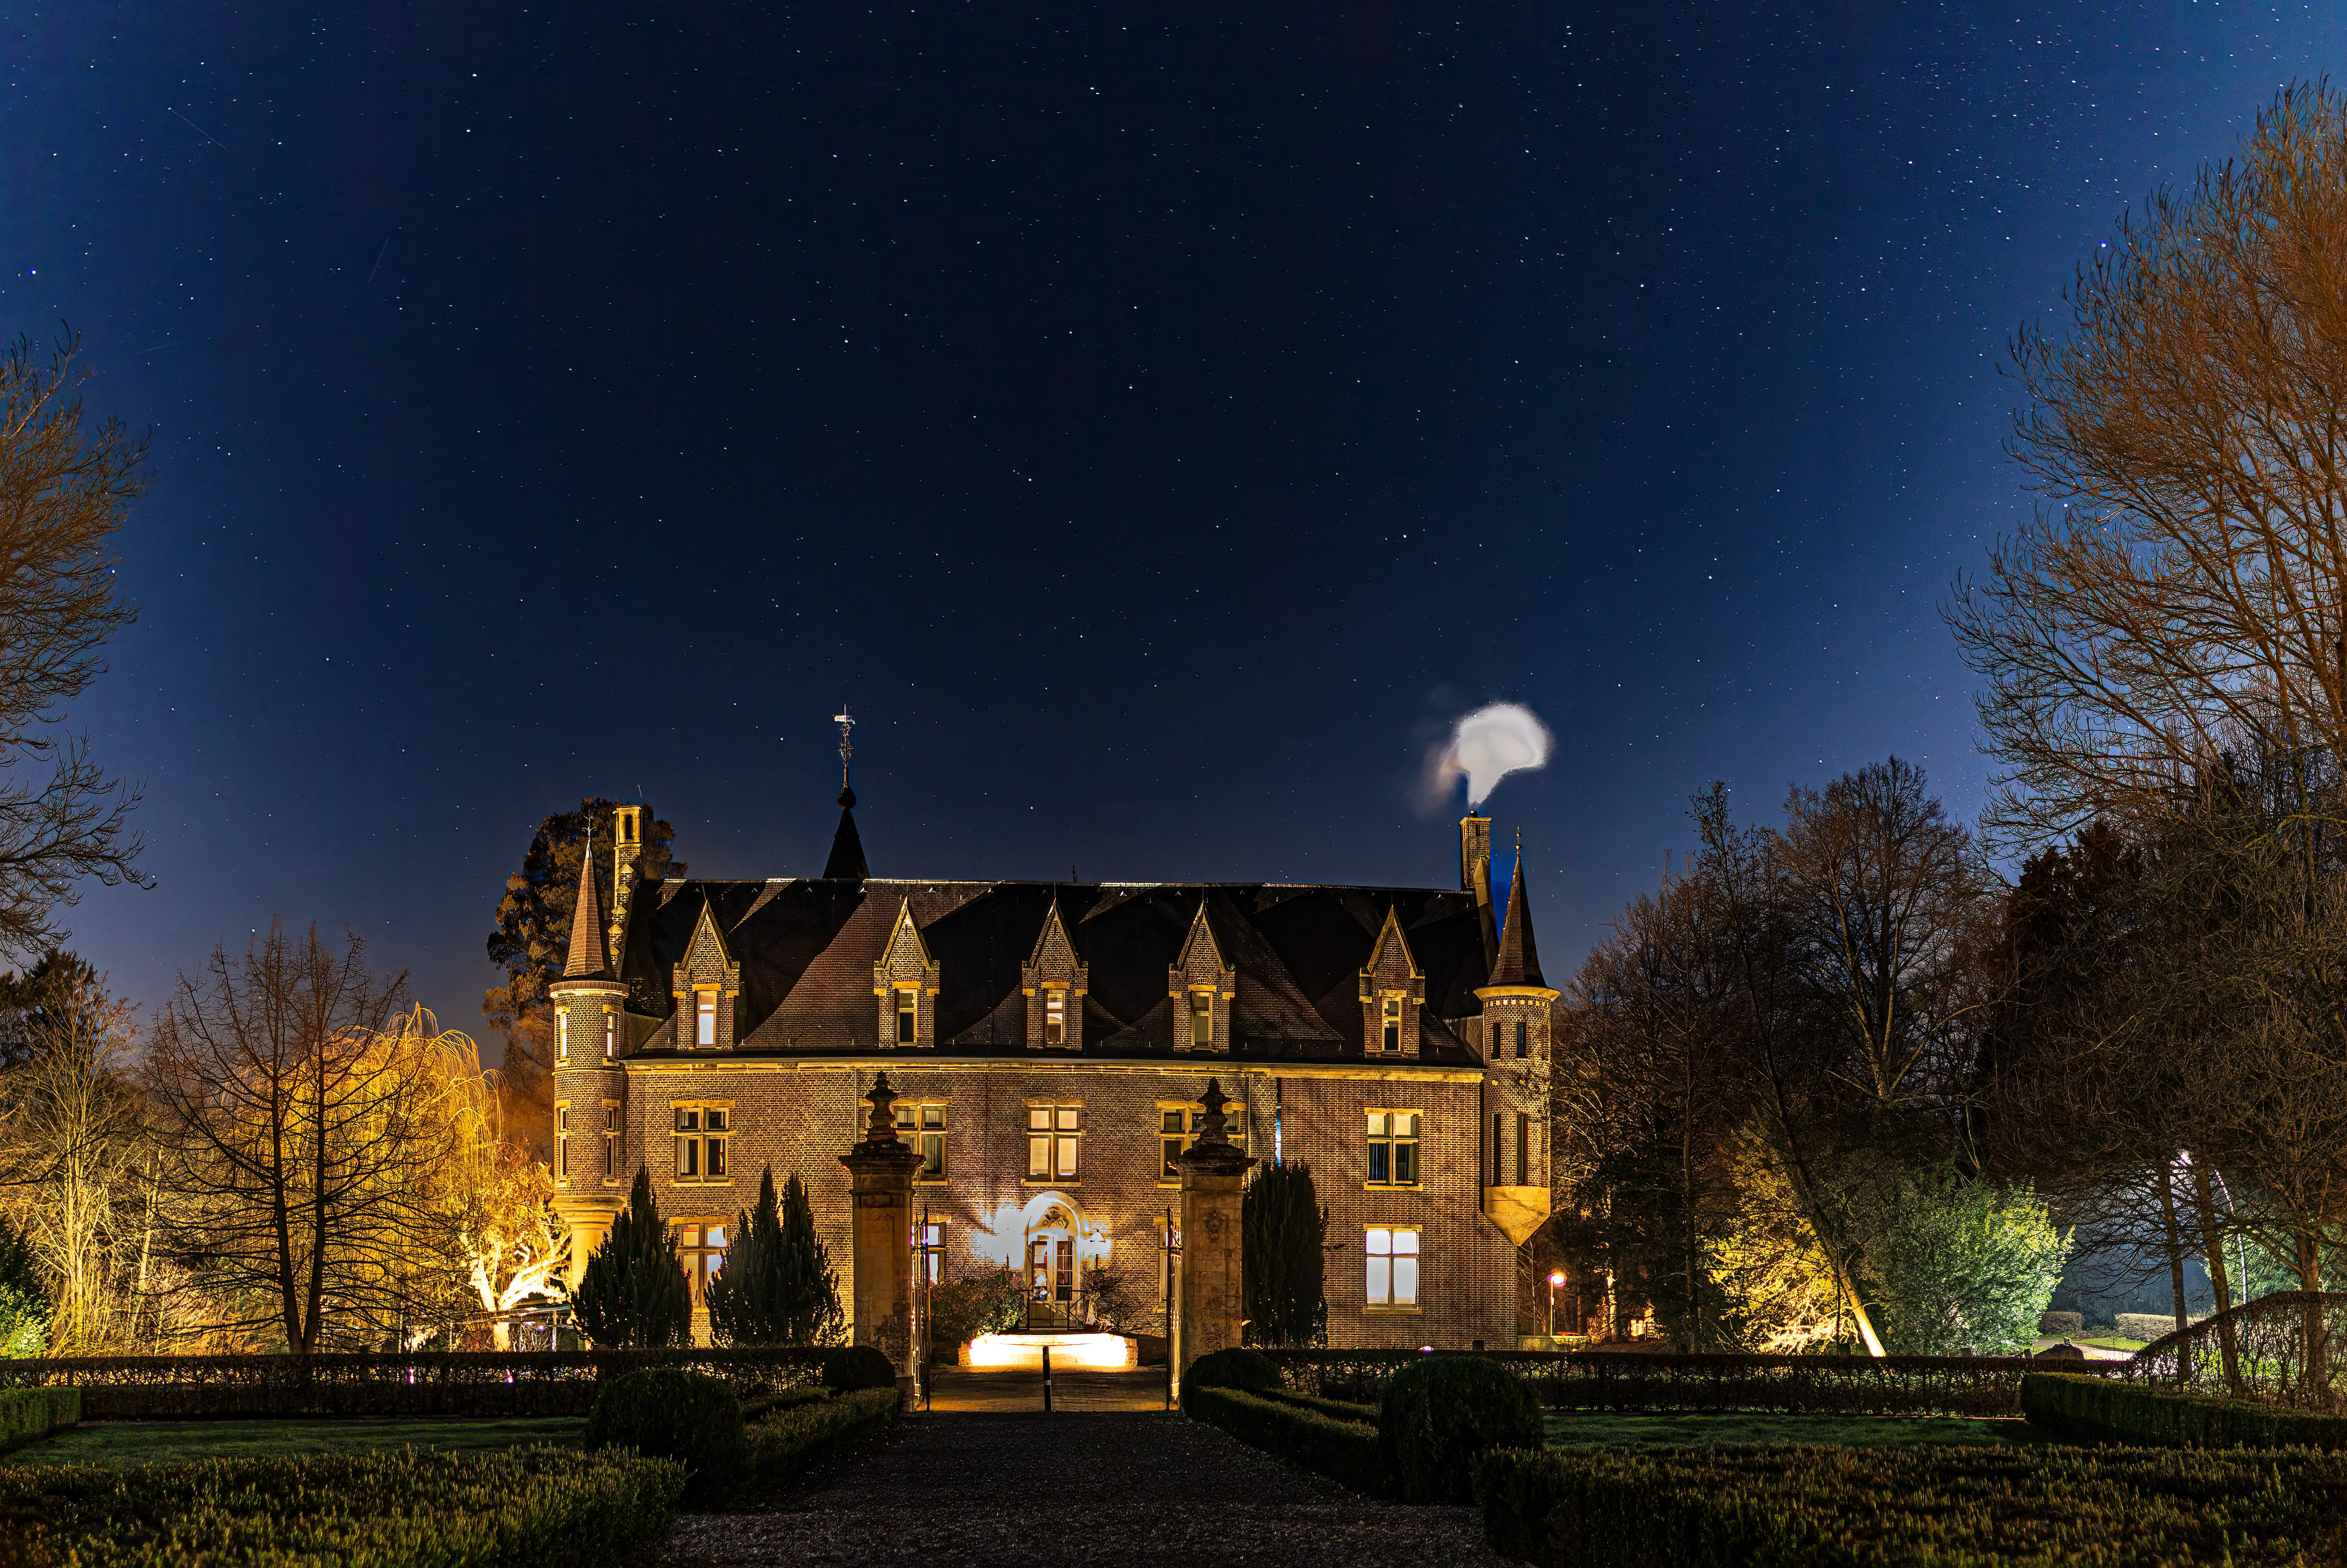 Castle of Terworm in the Netherlands under a stary and bright night